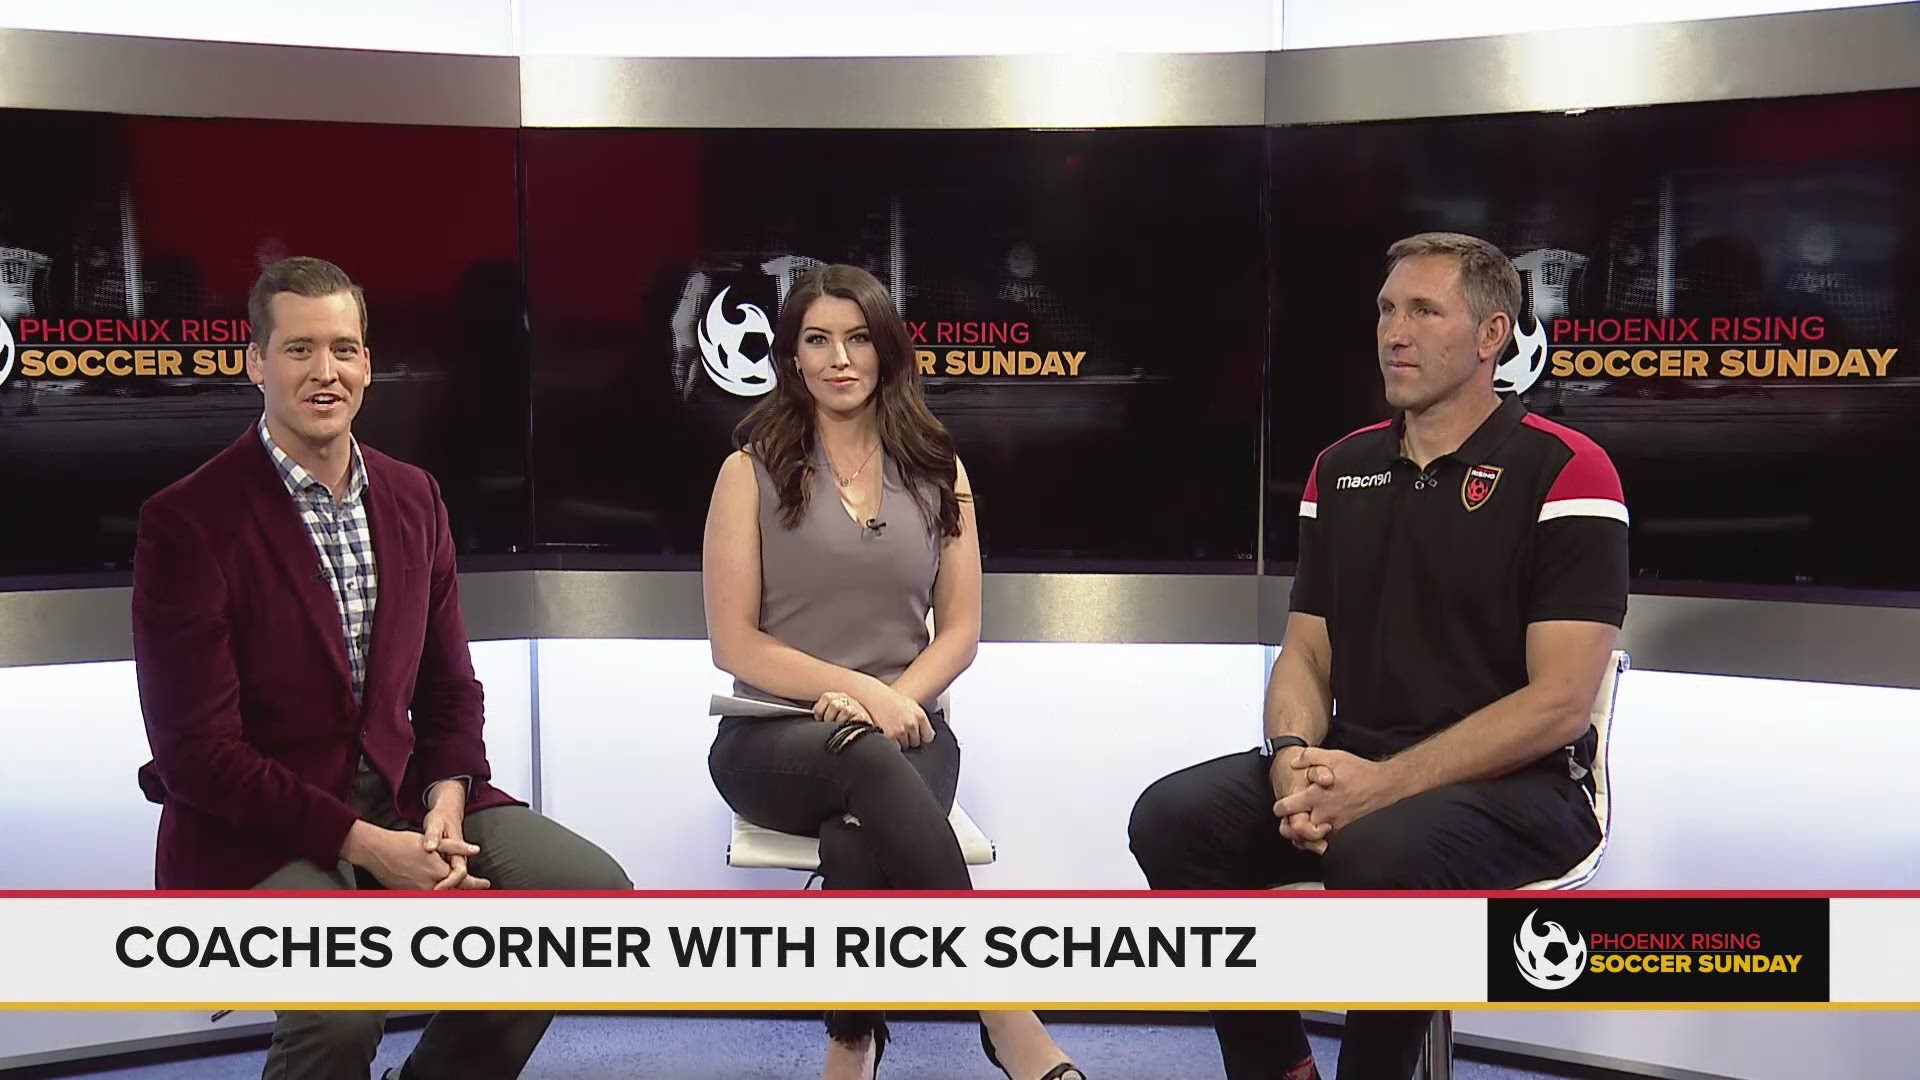 Rick Schantz is stepping into a new role at the Phoenix Rising... head coach! Meet the team's new leader. This content is sponsored by the Phoenix Rising FC.